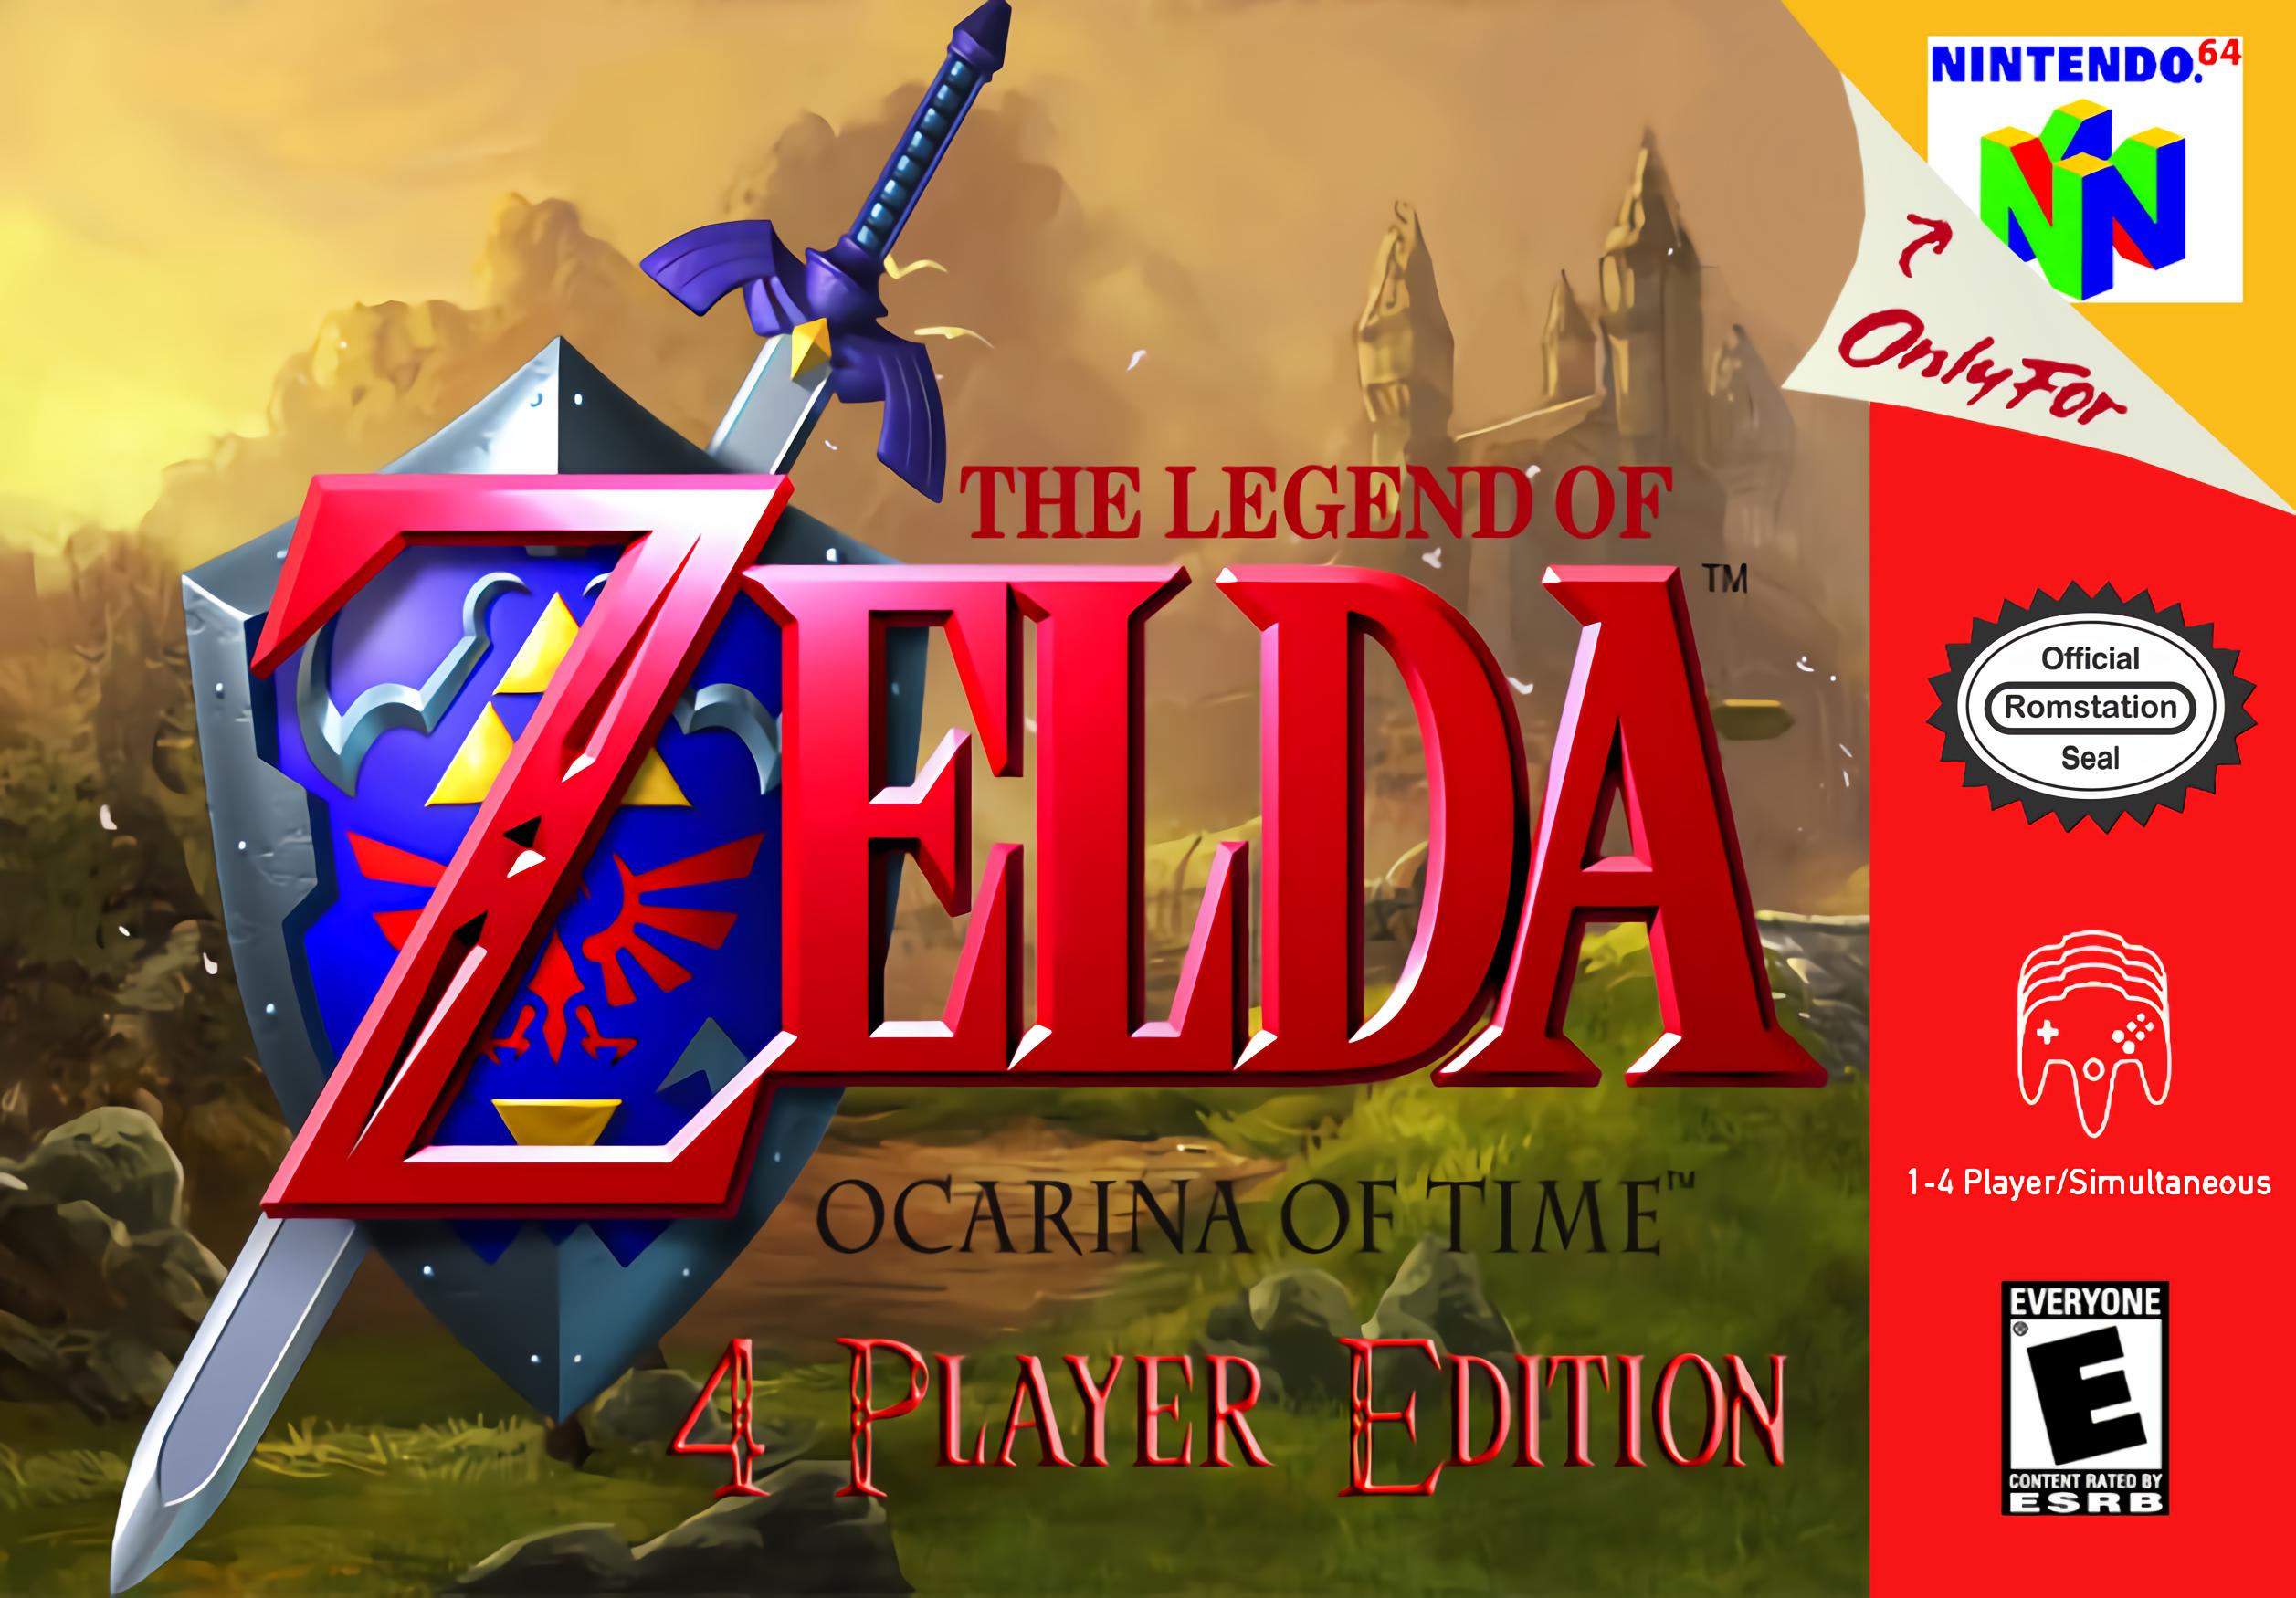 The Legend of Zelda : Ocarina of Time - 4 Player Edition